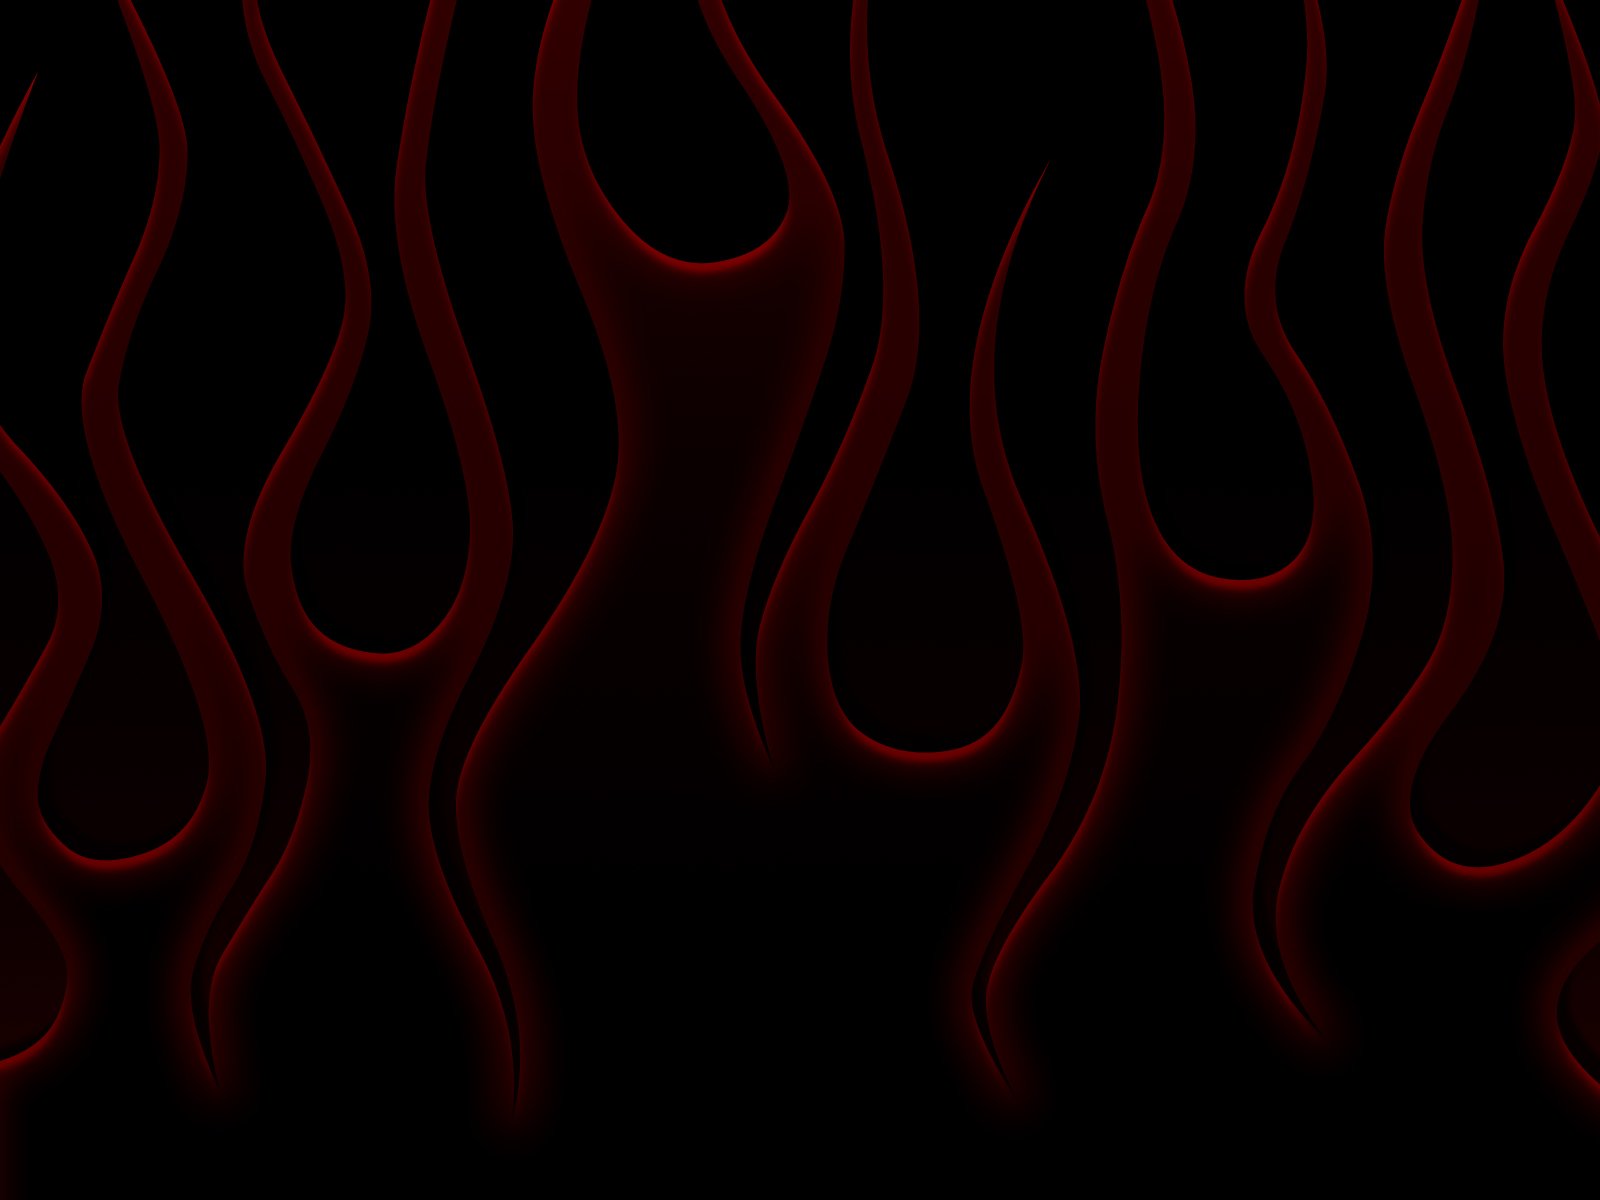 Red And Black Flames Wallpaper